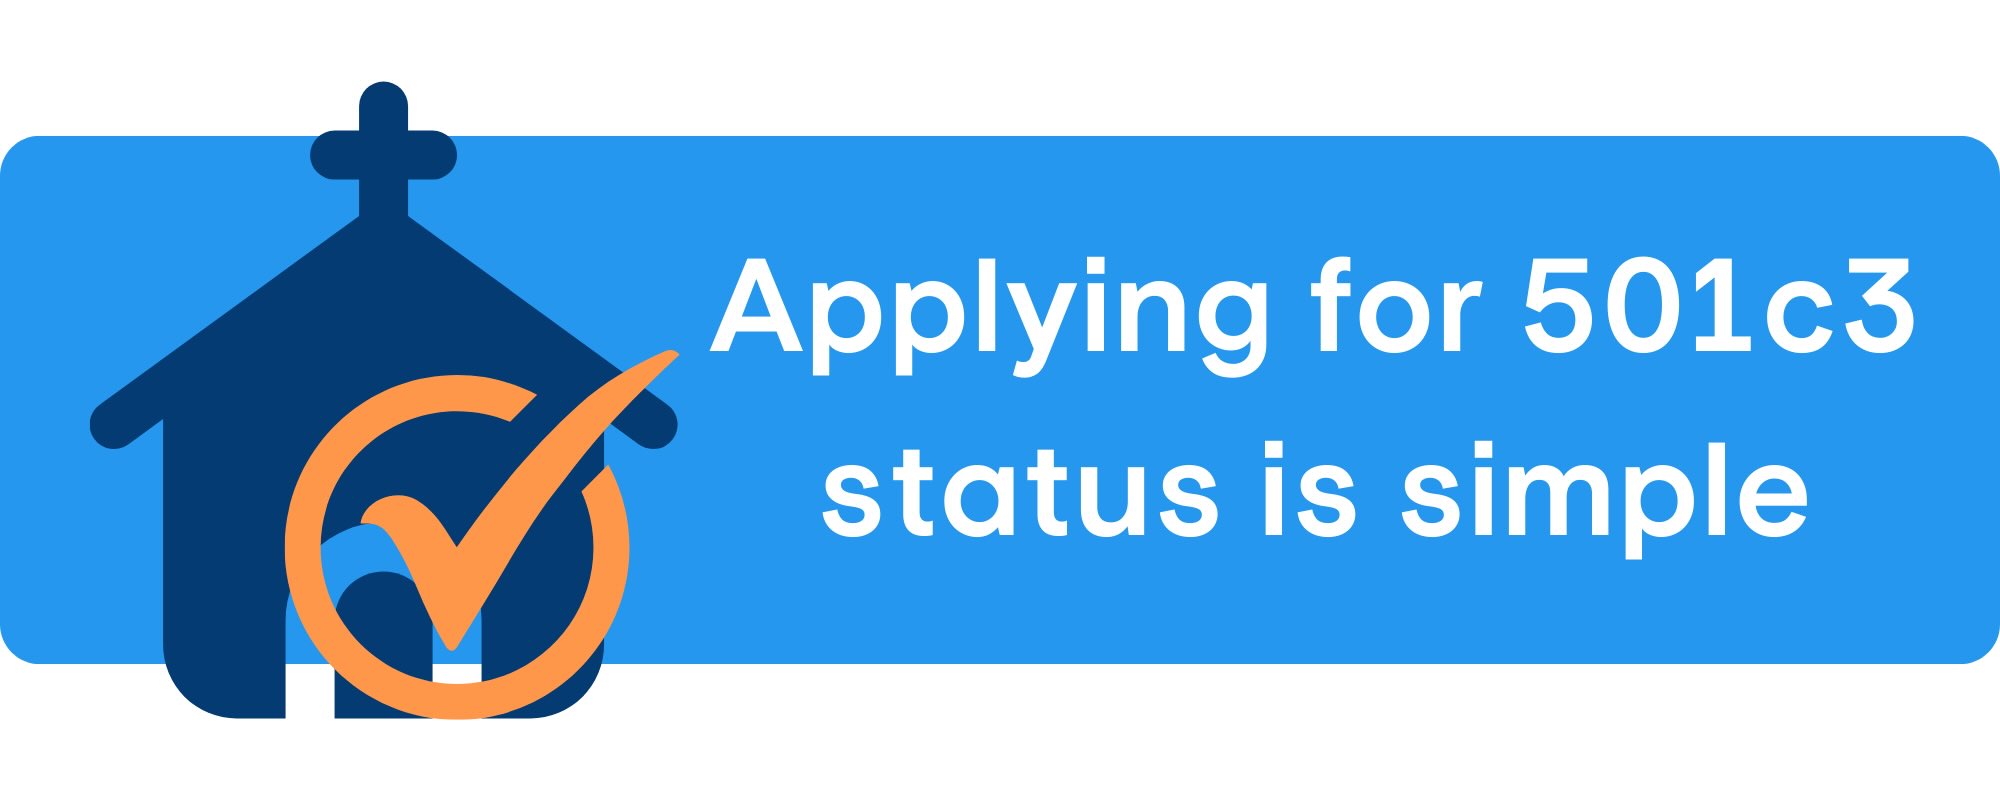 The process to apply for 501c3 status is simple but can be time-consuming